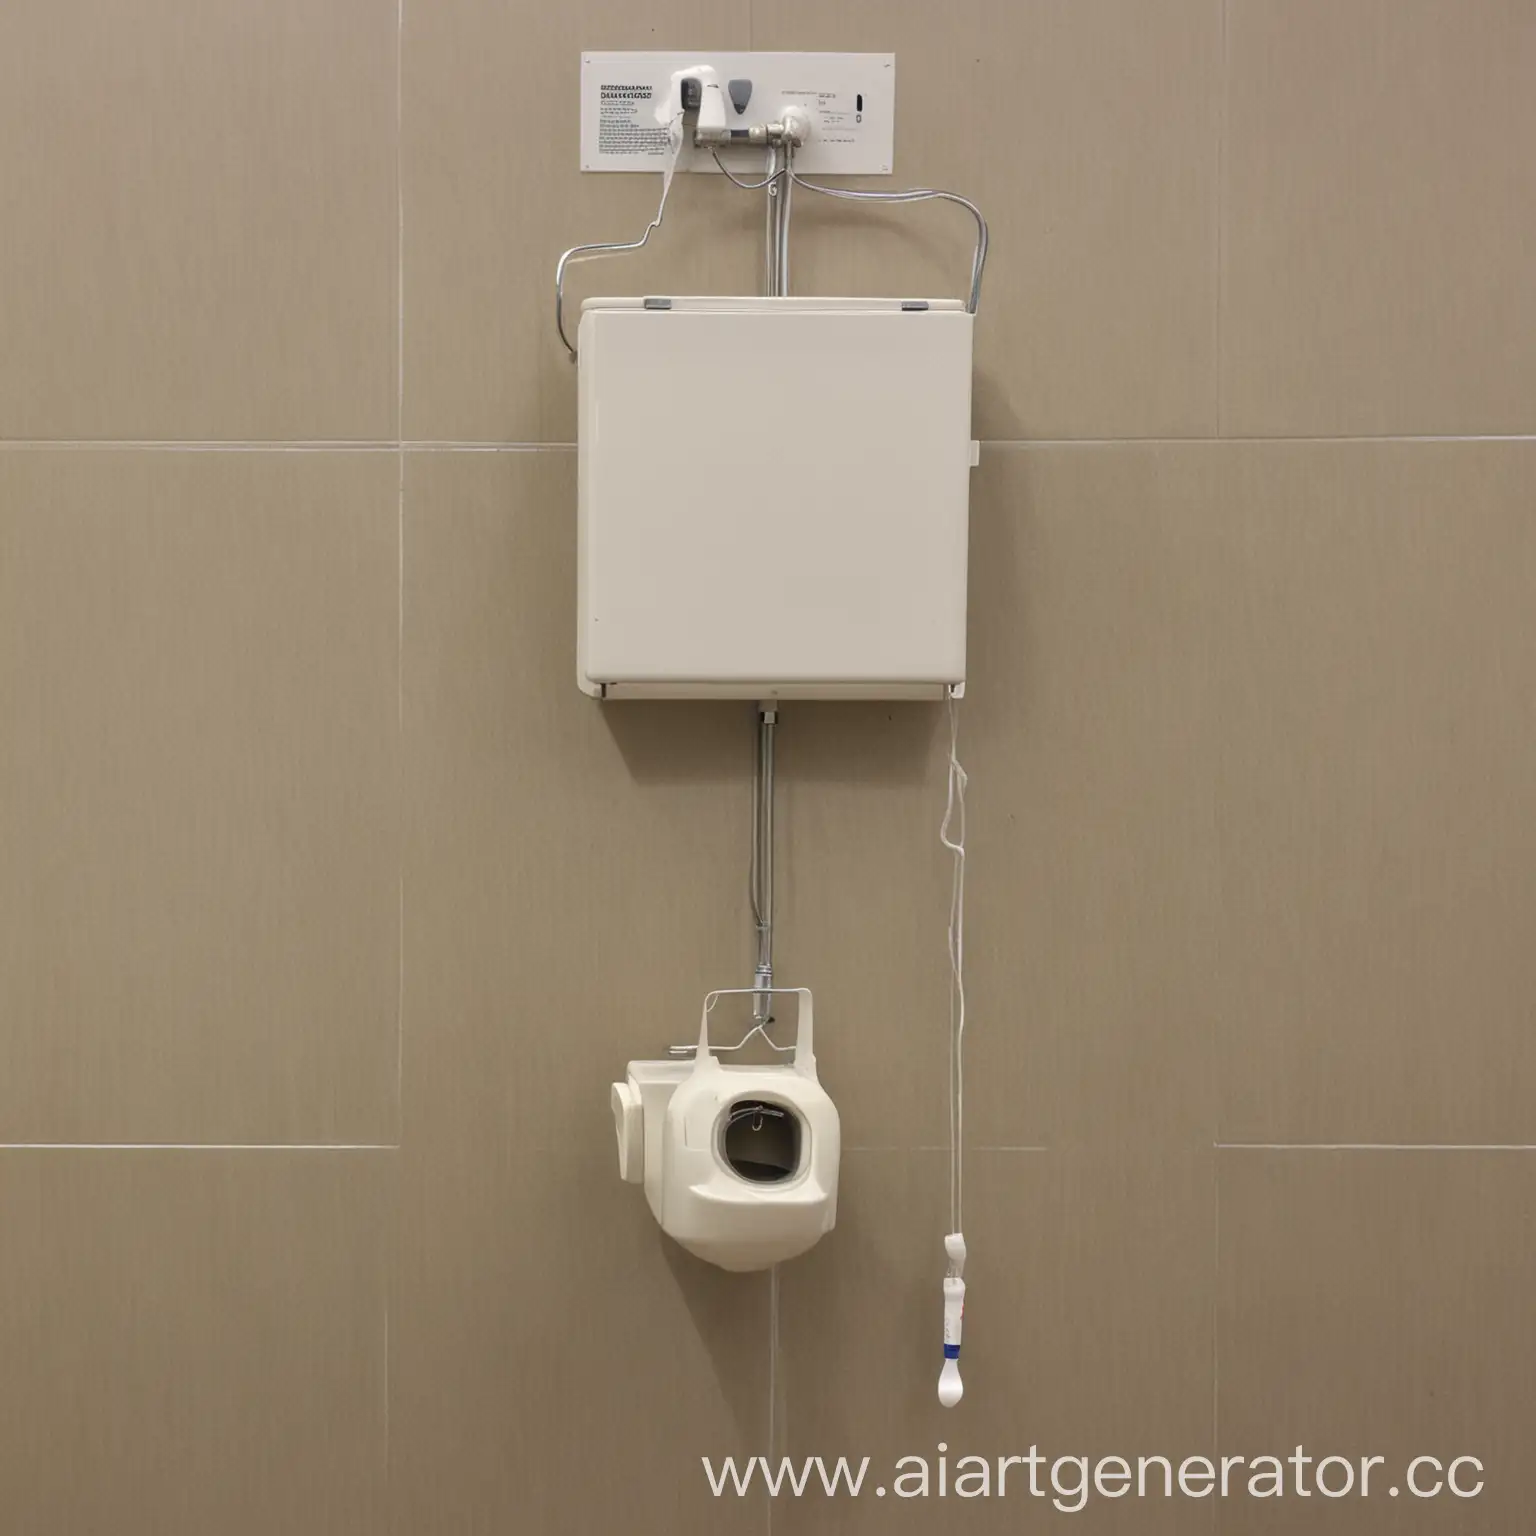 Enema-Administration-Container-in-Bathroom